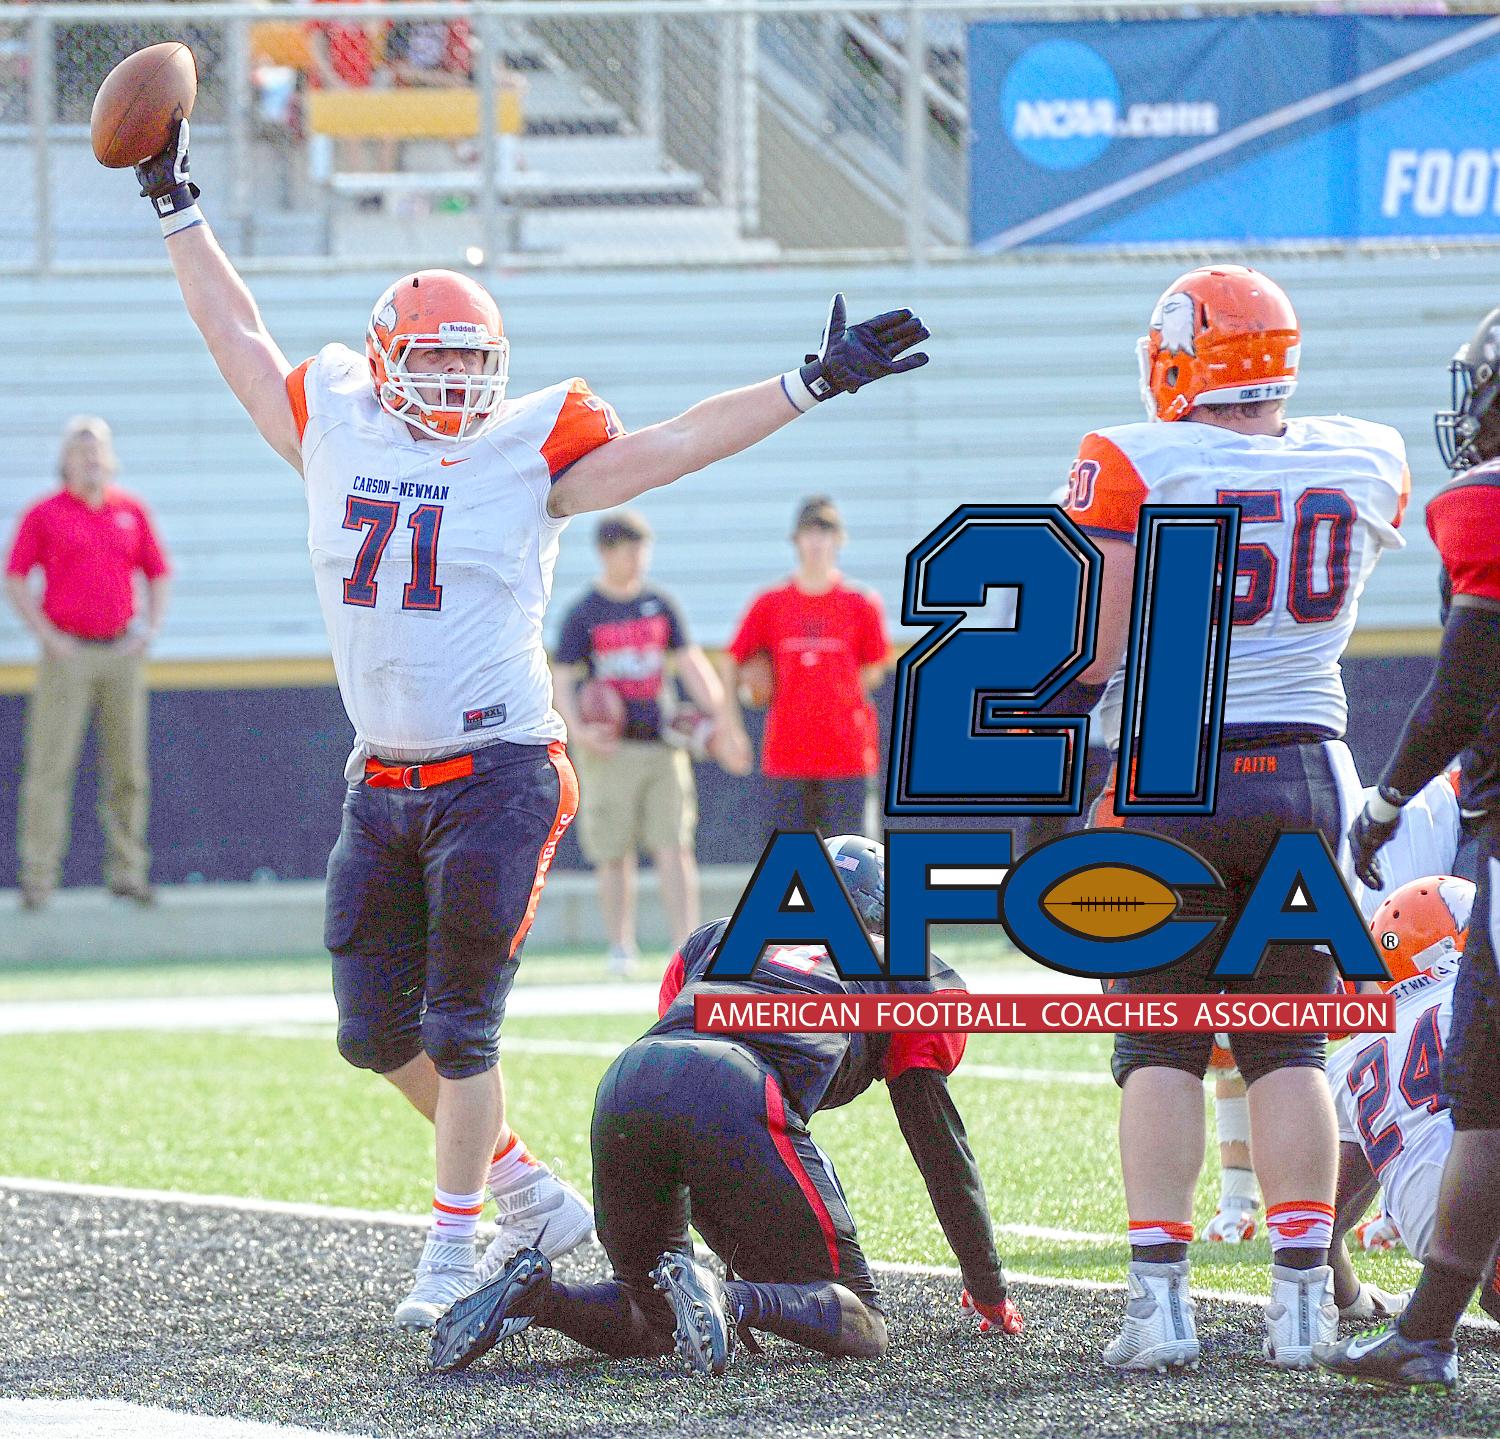 Eagles close the year tied for 21st in AFCA poll